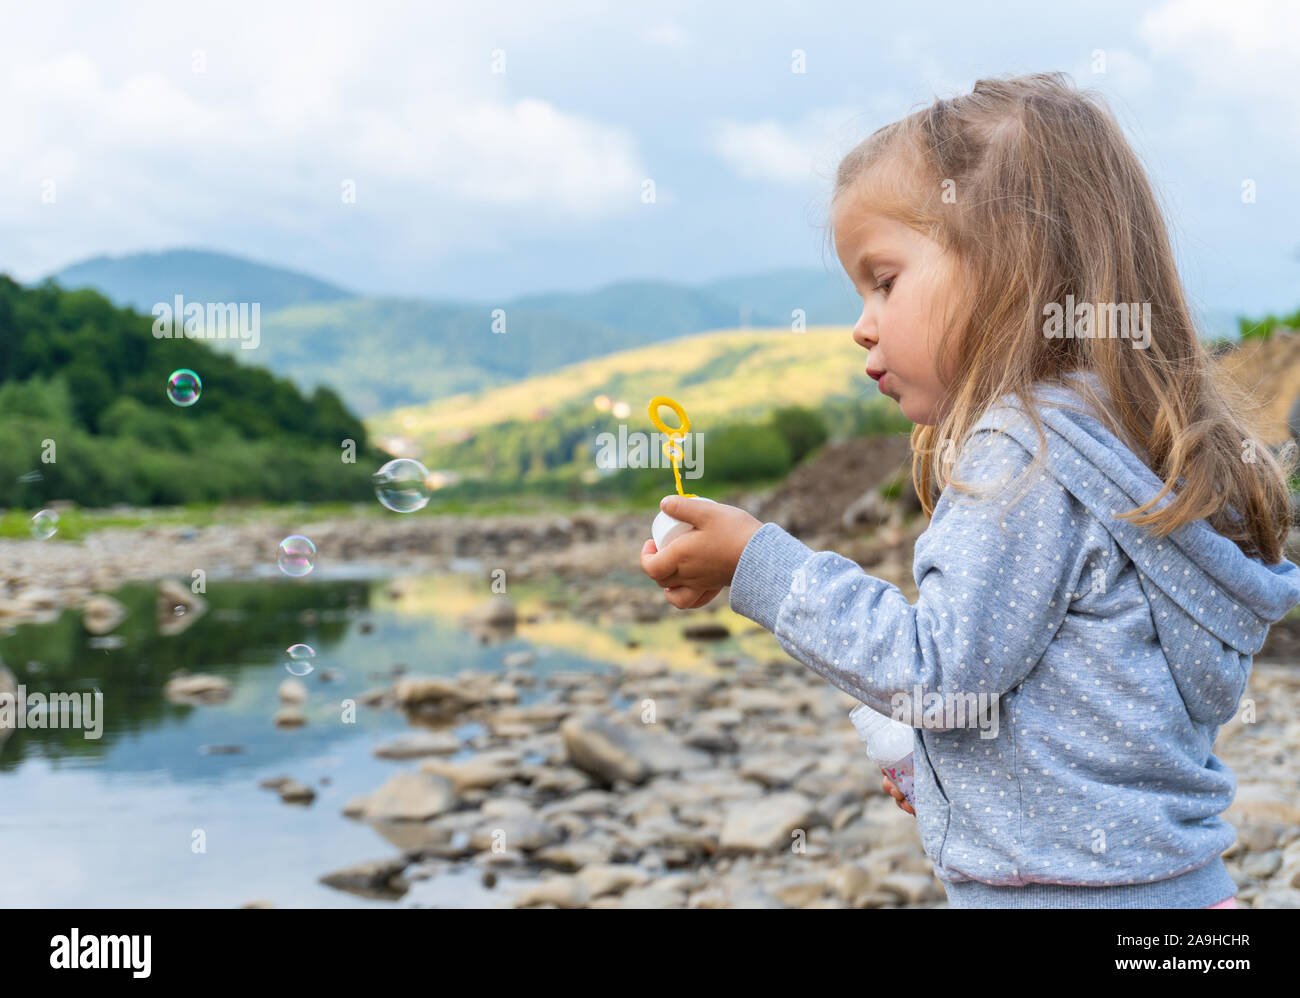 Little girl playing with soap bubbles near mountain river Stock Photo